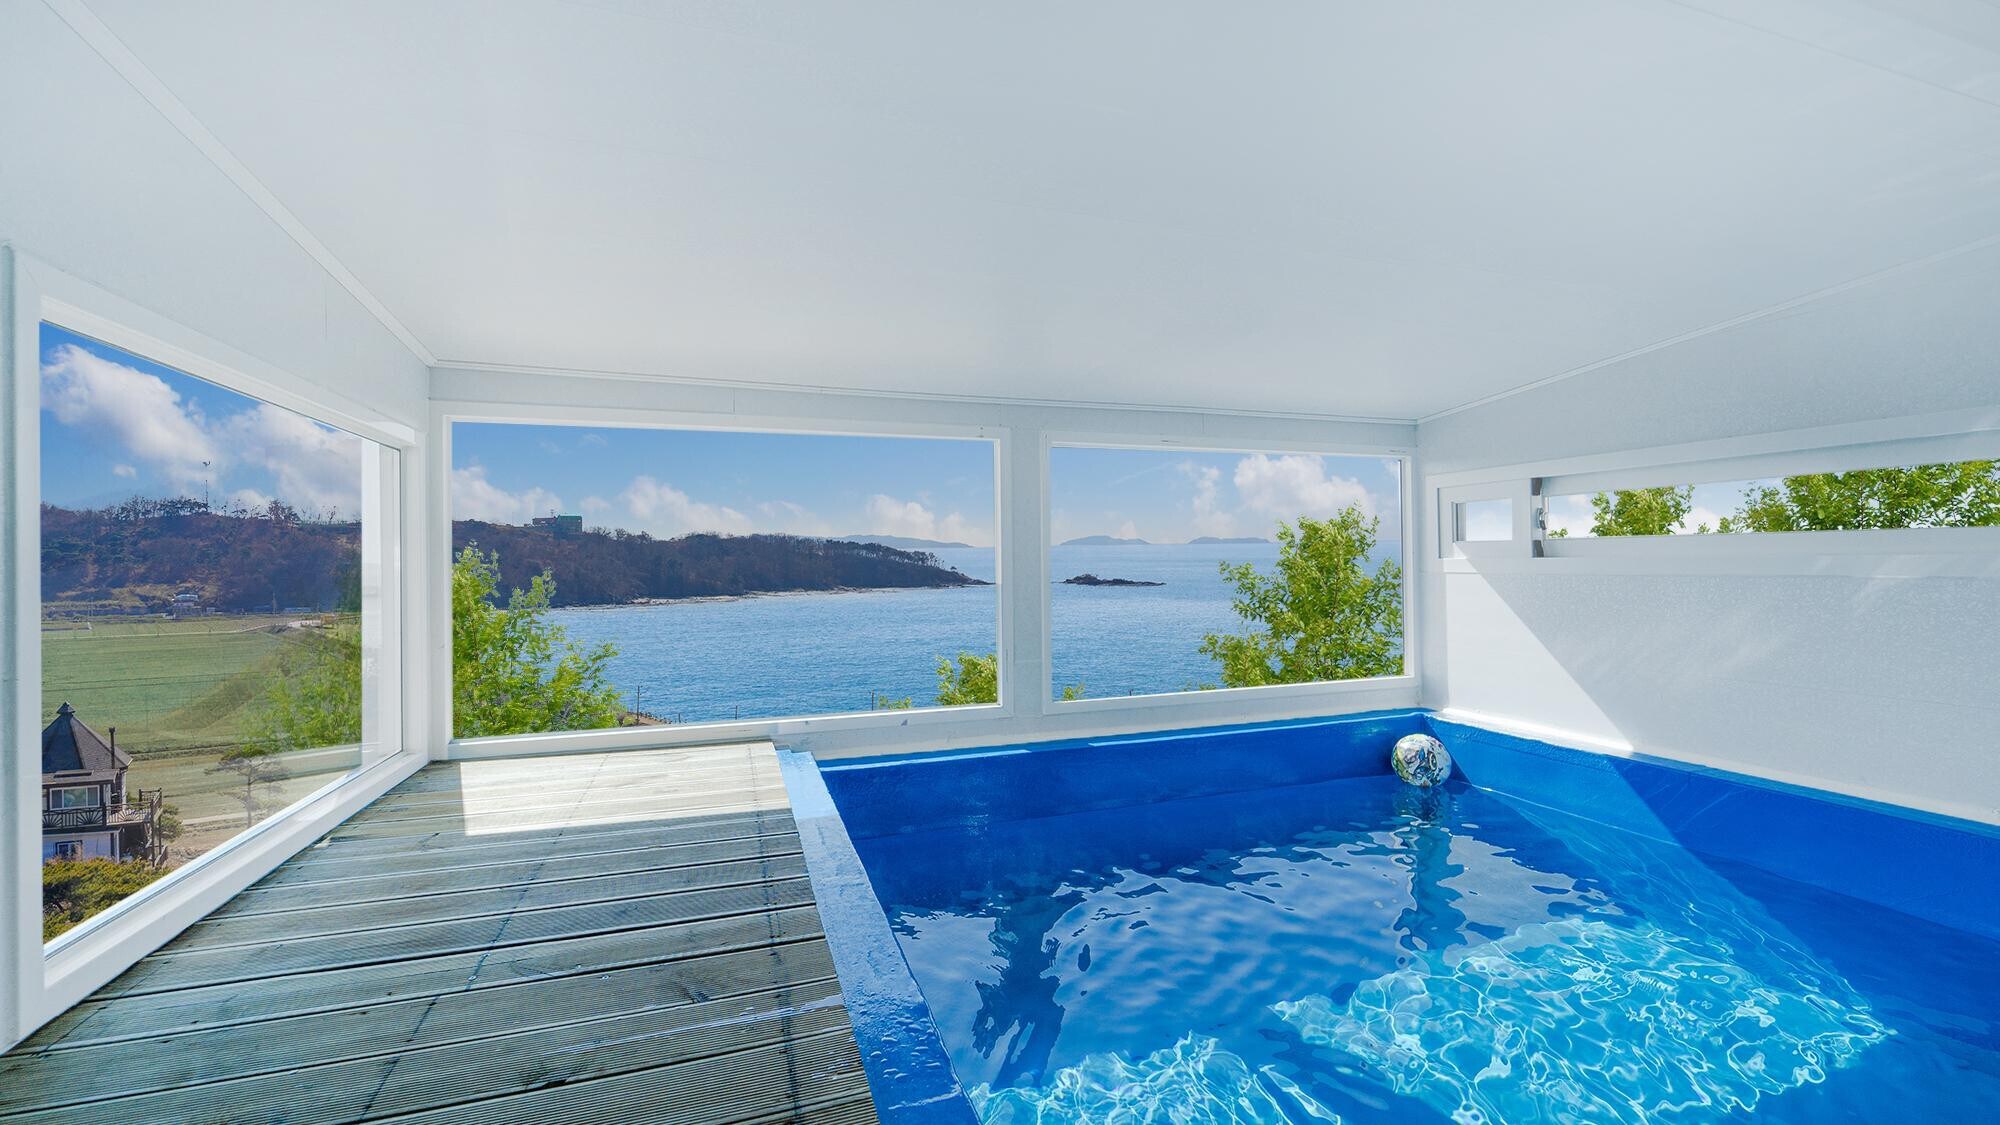 Property Image 2 - Beautiful ocean view home with indoor pool 2